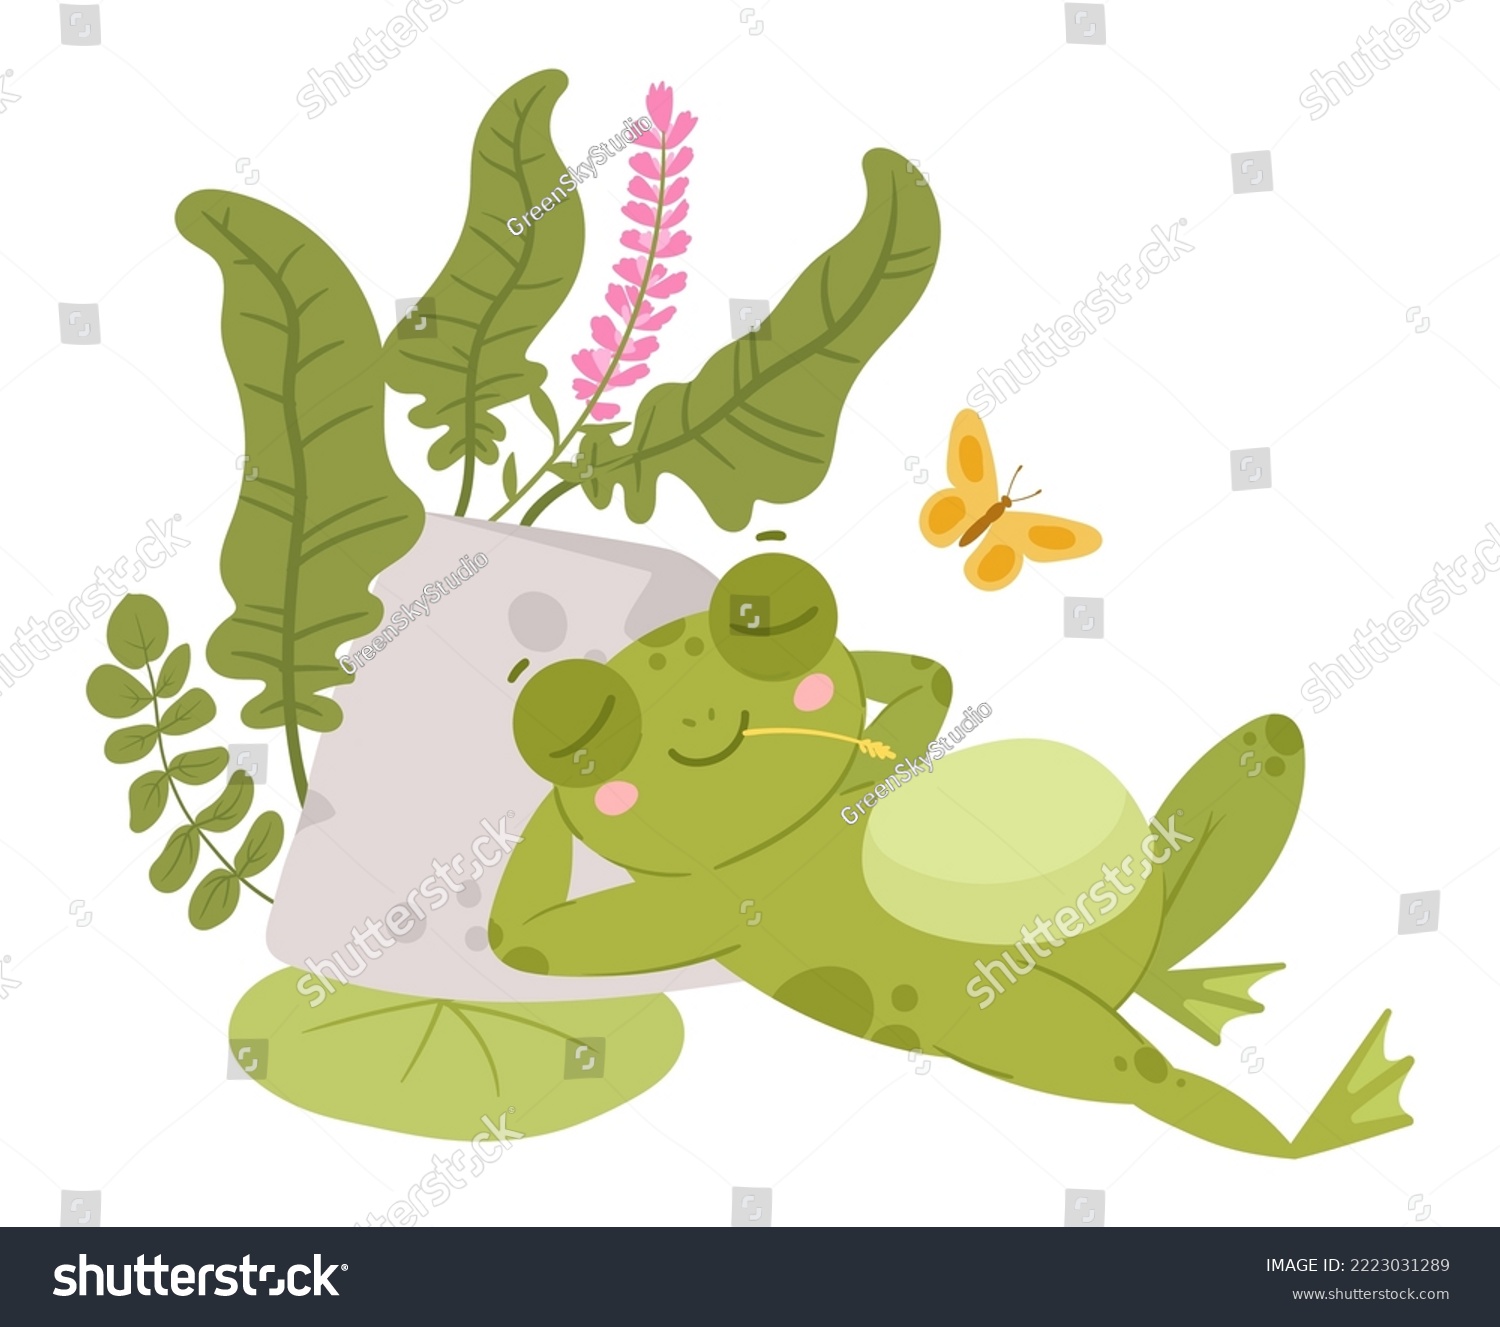 SVG of Cartoon amphibia, cute resting frog character. Sleeping green toad in natural habitat, froggy water animal with water lilies and reed flat vector illustration. Tranquil green frog svg